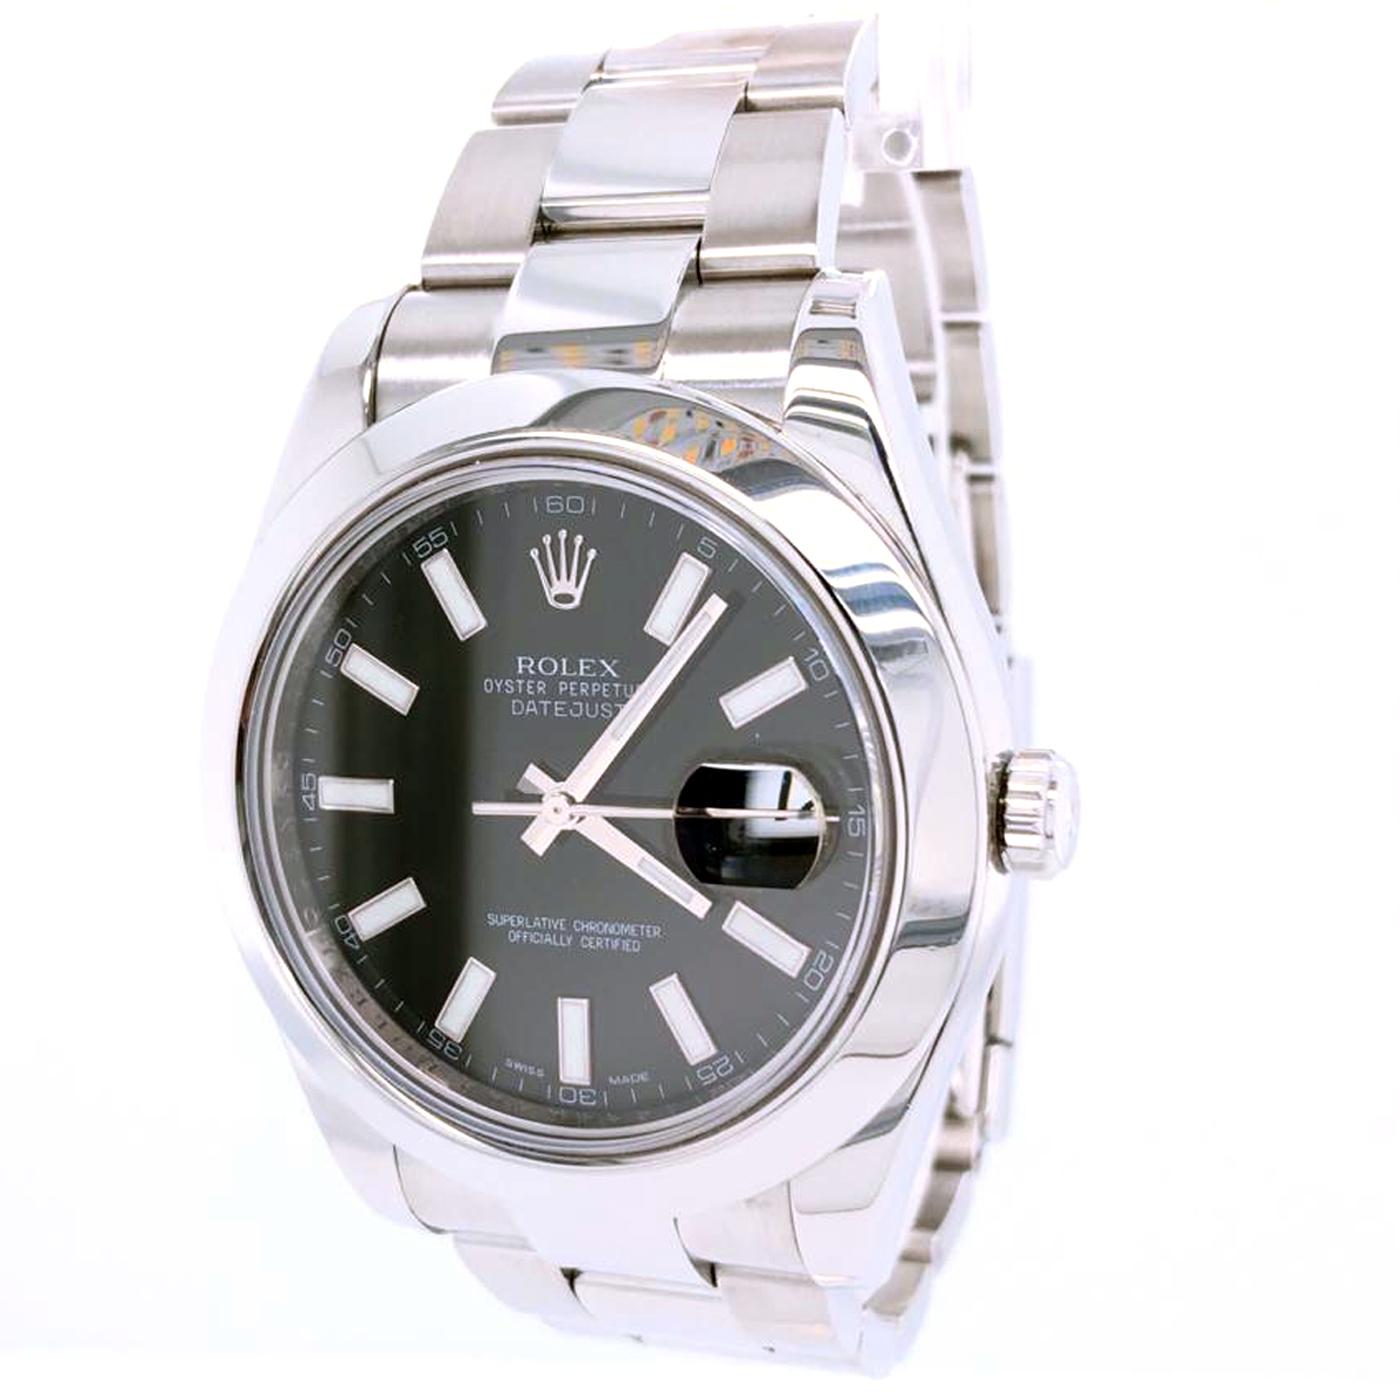 The Rolex Datejust II is perfect for those who find the Rolex Datejust 36 that bit too small. Model number 116300, this watch has a steel 41mm watch casing with a domed bezel. Water-resistant up to 100m, the watch casing is fitted with a steel Rolex